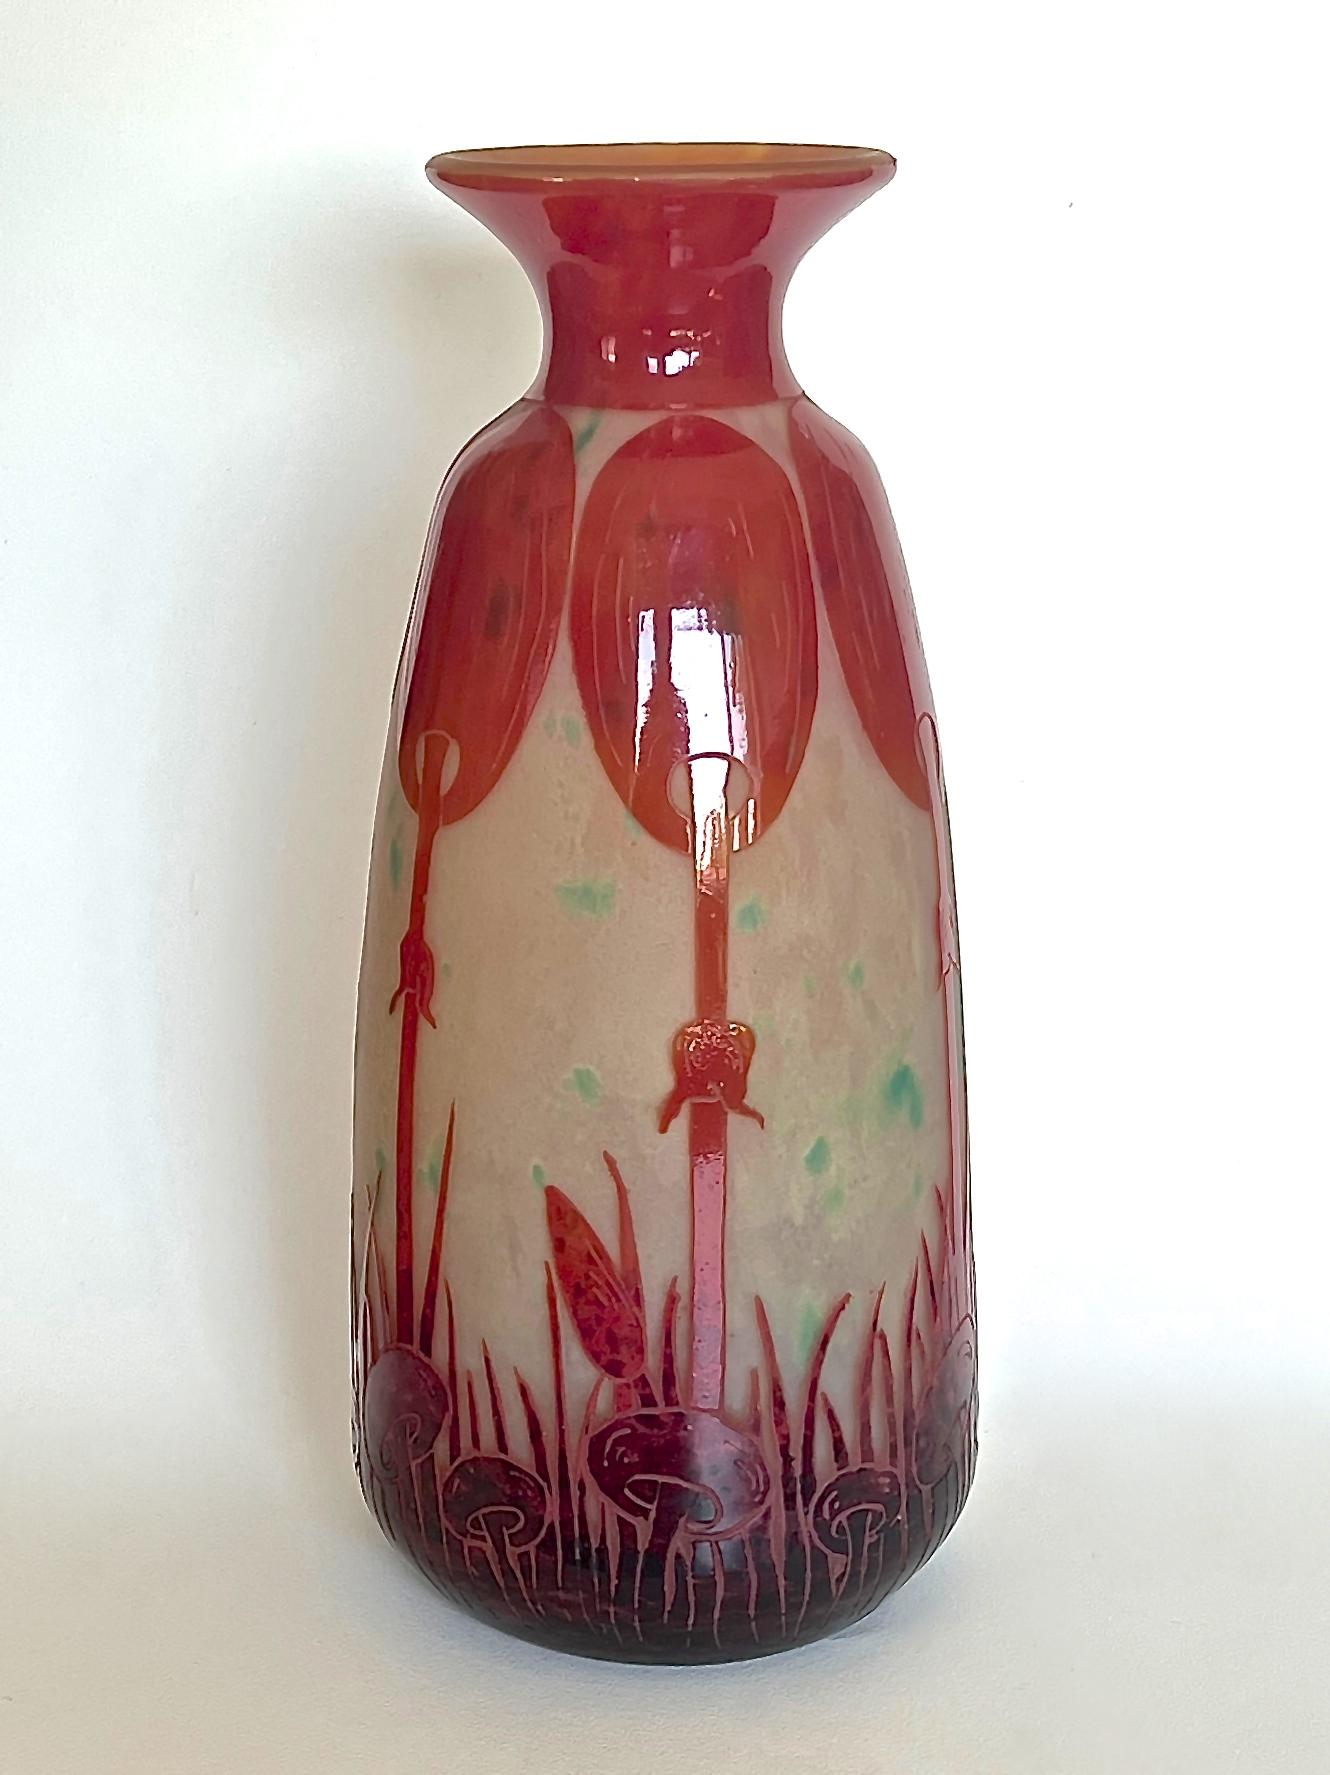 A stunning and large Art Déco cameo glass vase of baluster form. The opaque yellow ground is textured and mottled sparingly with an acid-green. It is overlaid with a deep mottled maroon that graduates upwards to a bright red then acid-etched & wheel